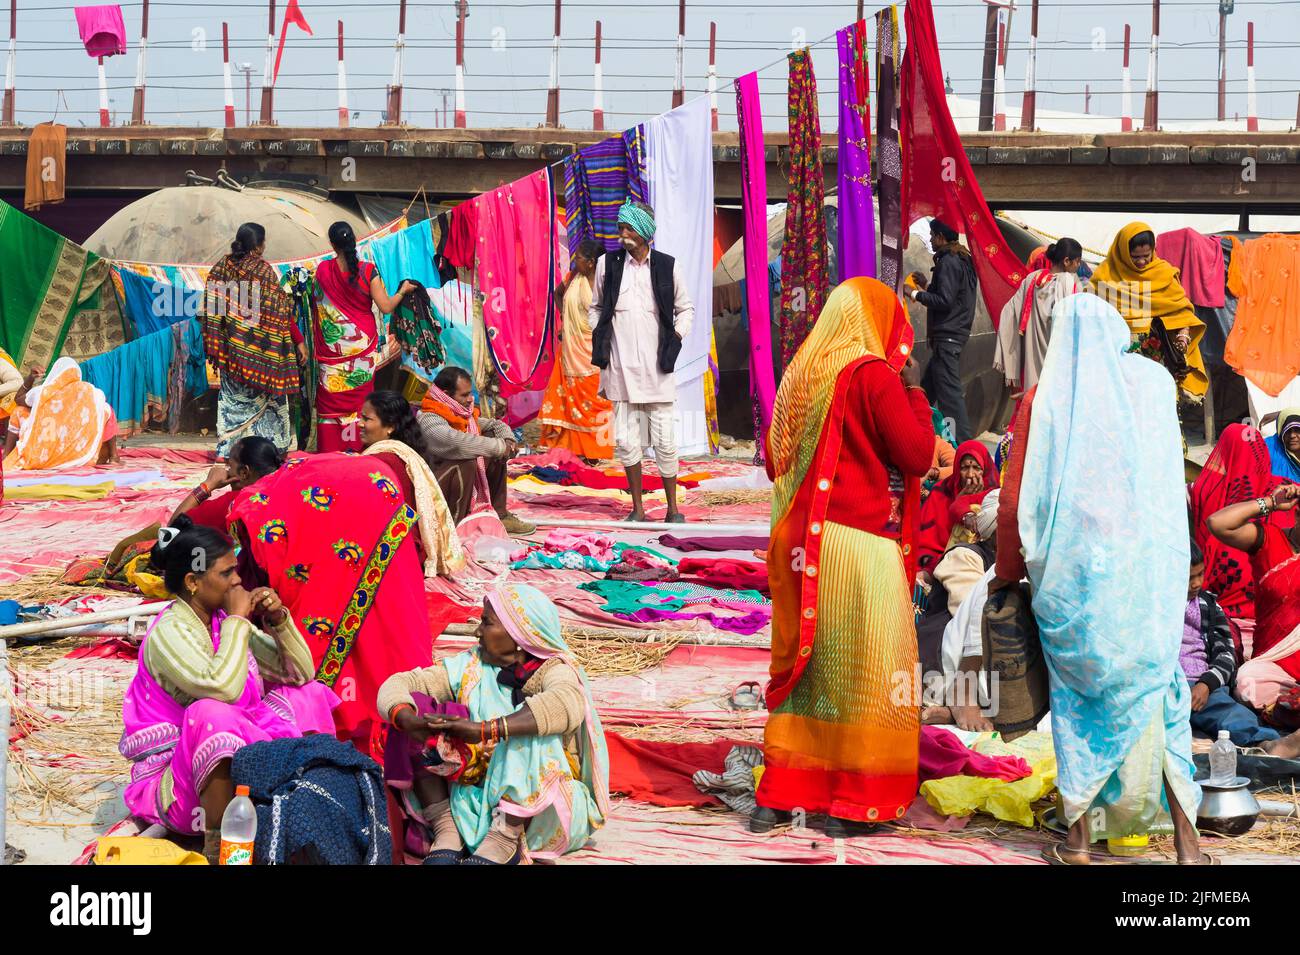 Pilgrims in front of a temporary pontoon and stretching out washing to dry, Allahabad Kumbh Mela, World’s largest religious gathering, Uttar Pradesh, Stock Photo